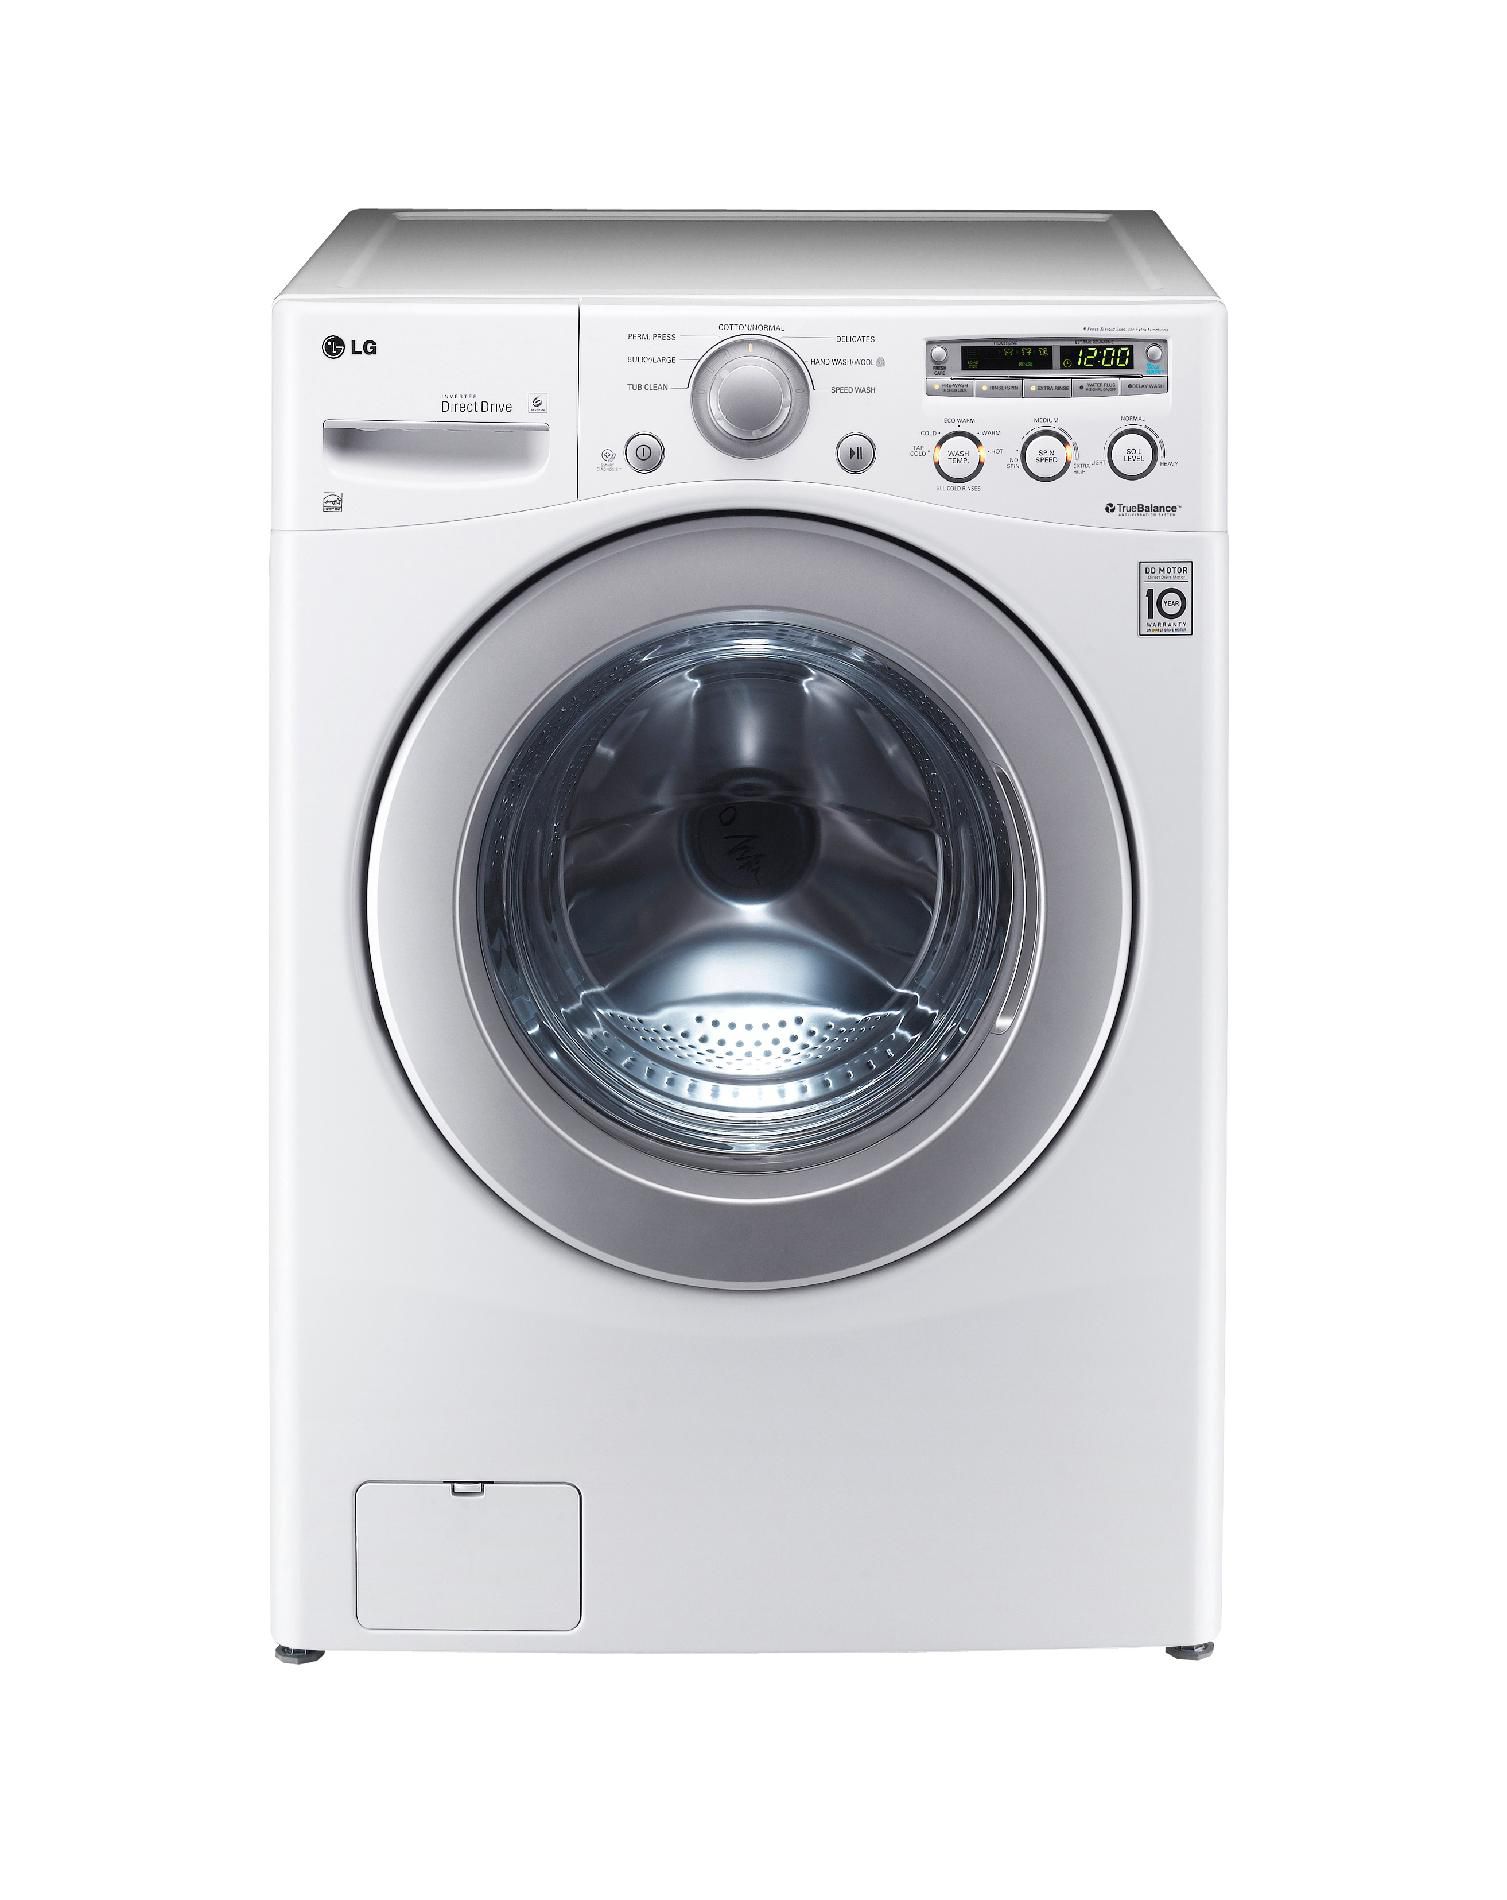 LG 3.6 cu. ft. Large Capacity Front-Load Washer - White Less than 4 cu. ft.